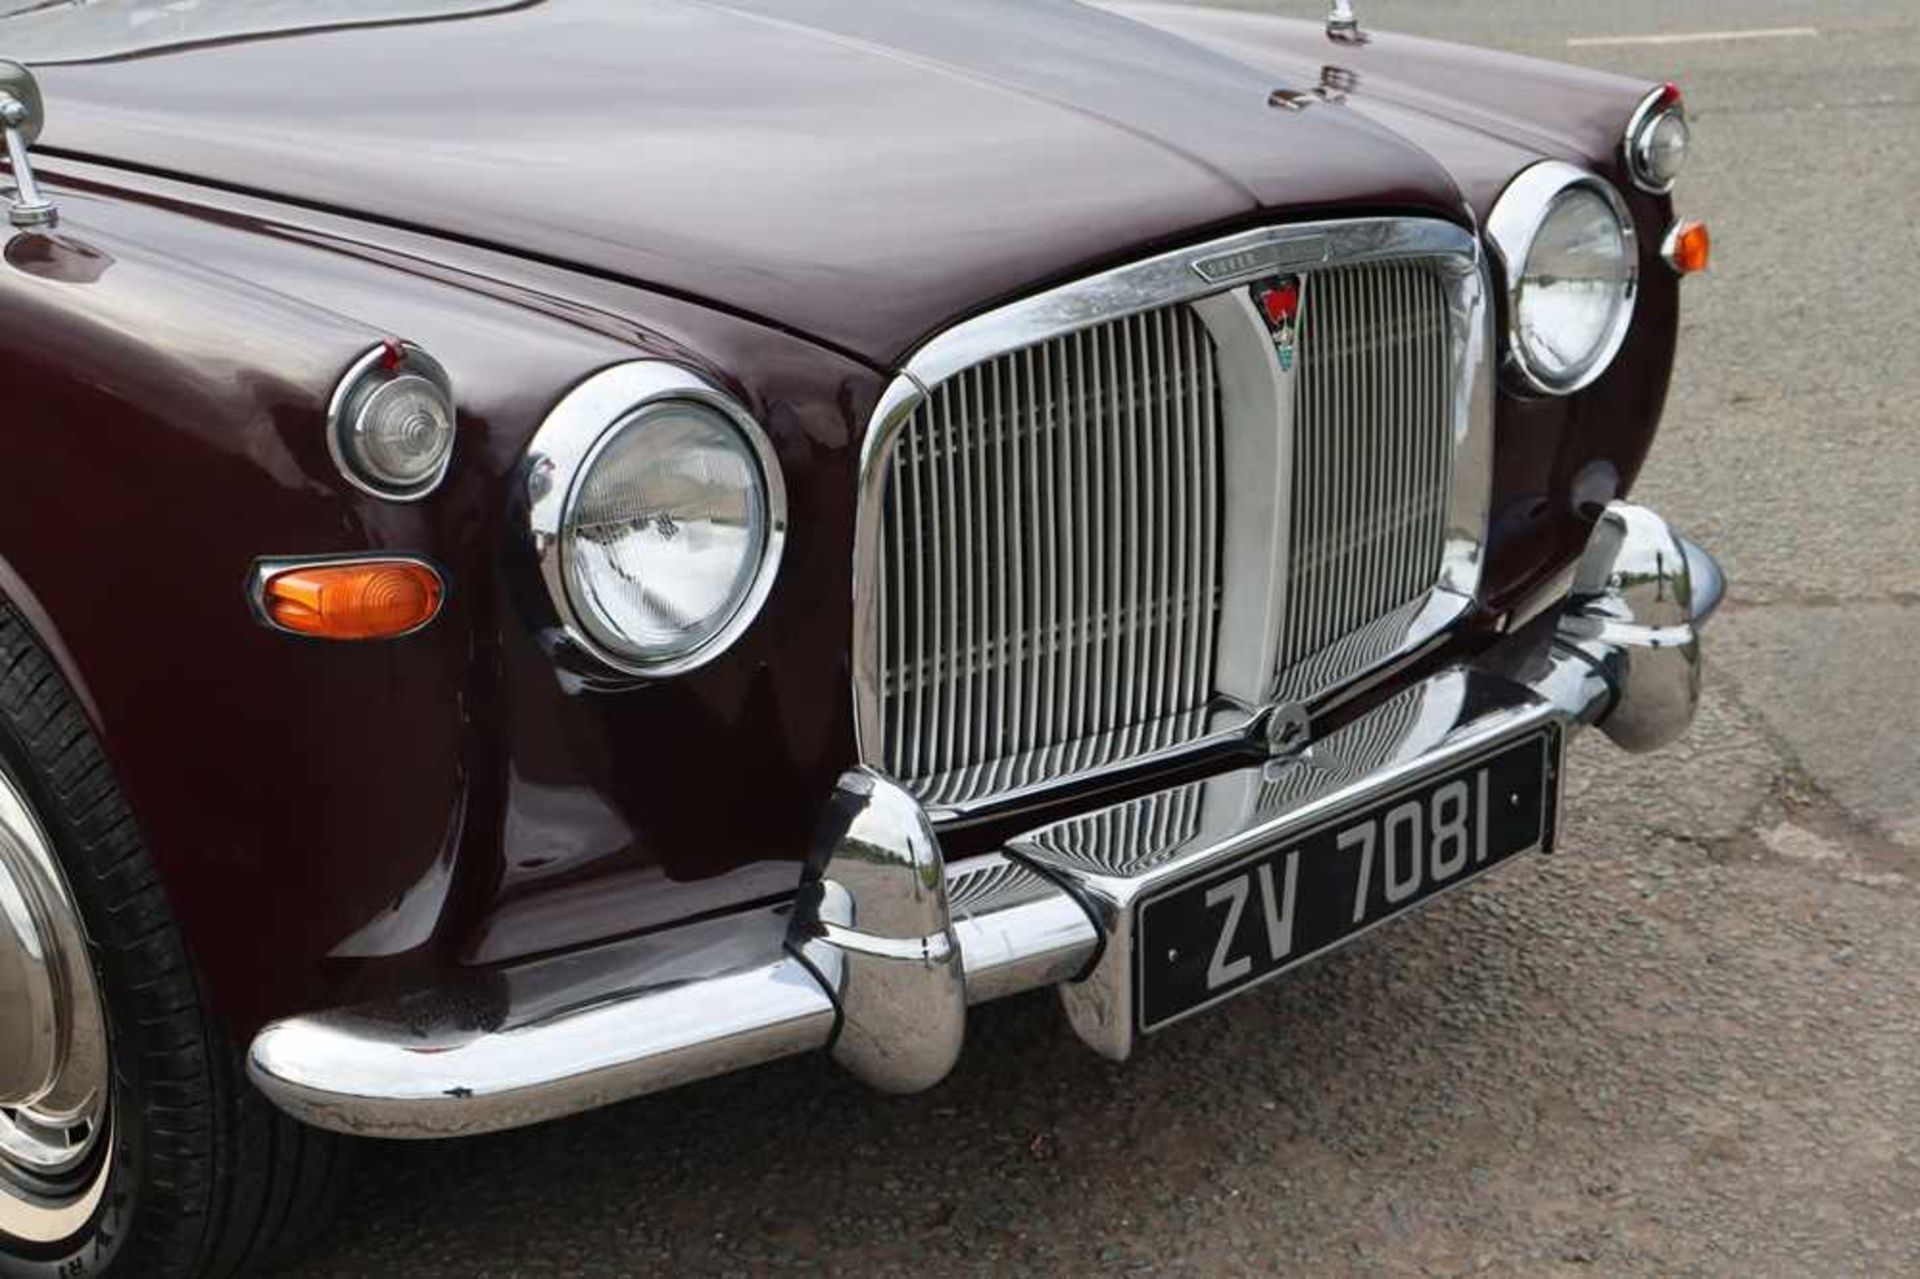 1964 Rover P5 3-Litre Coupe - Image 11 of 41